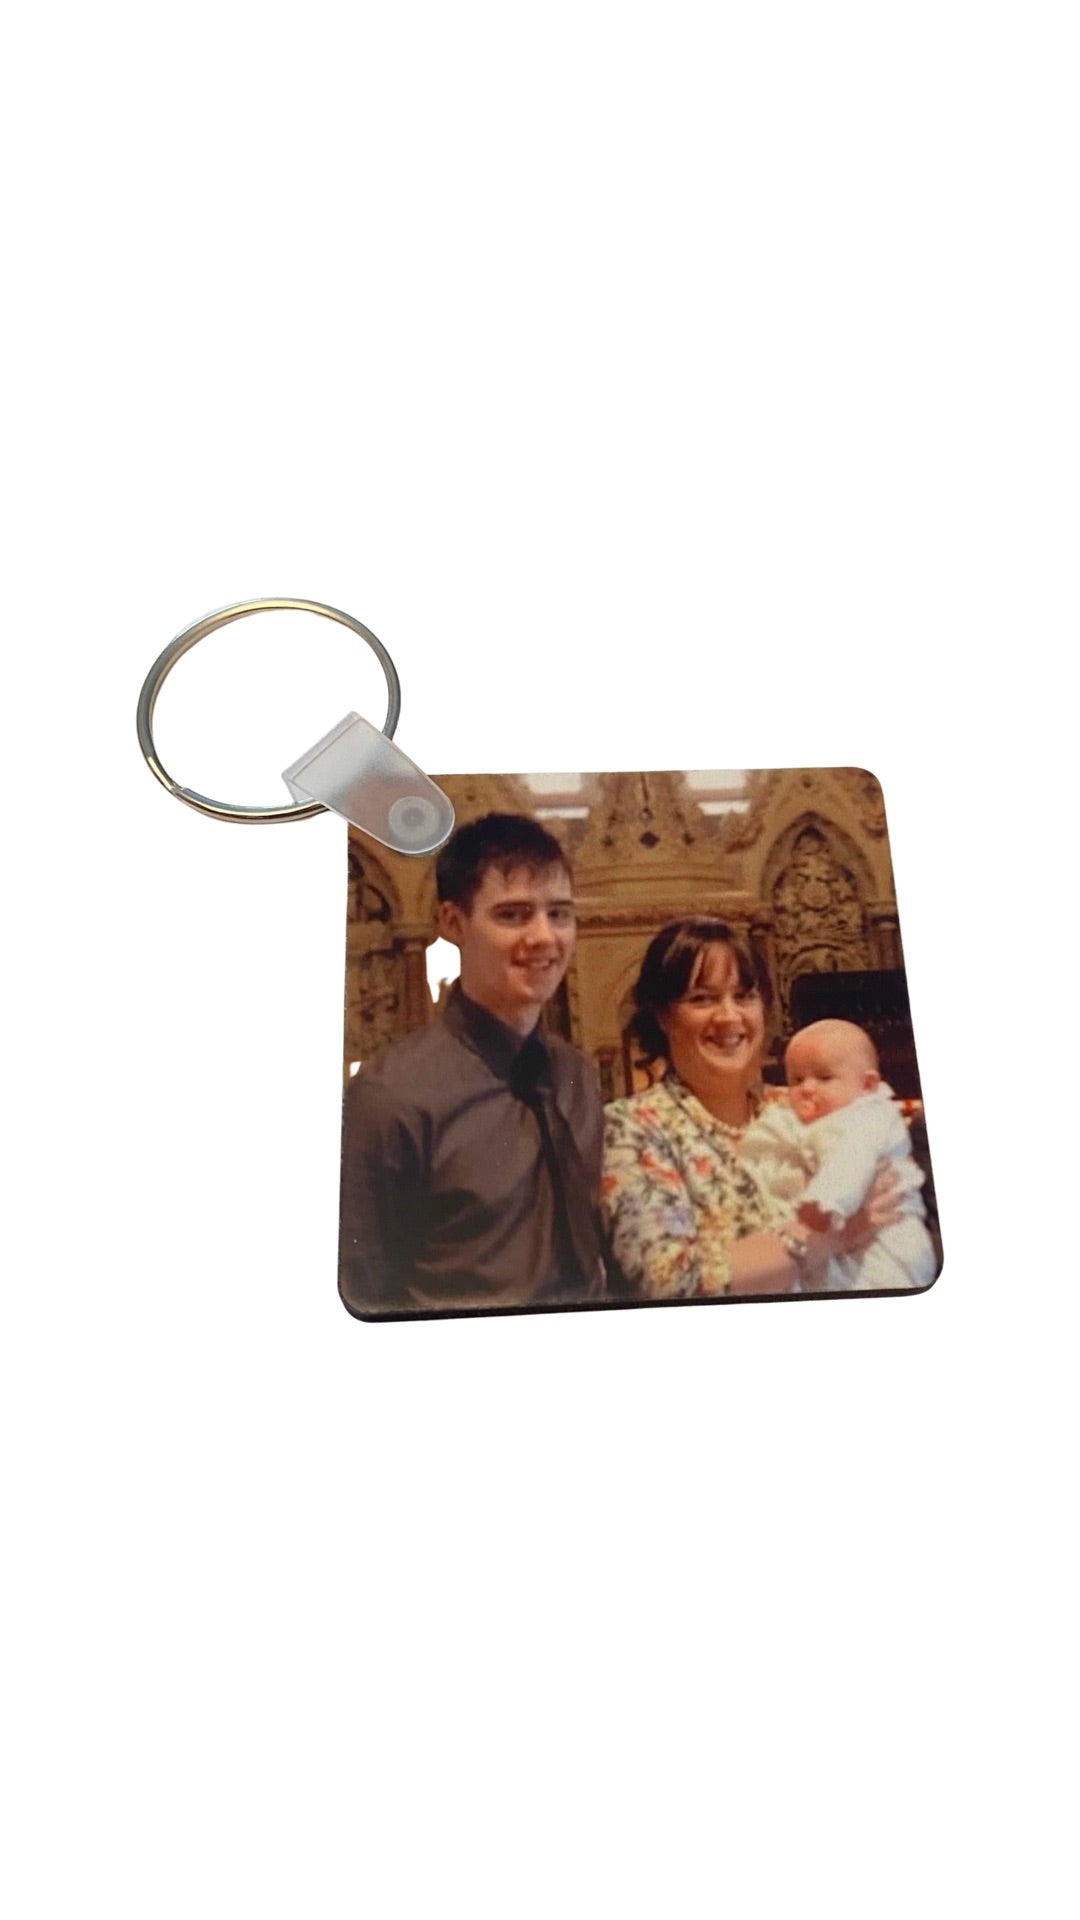 Personalise photo gifts